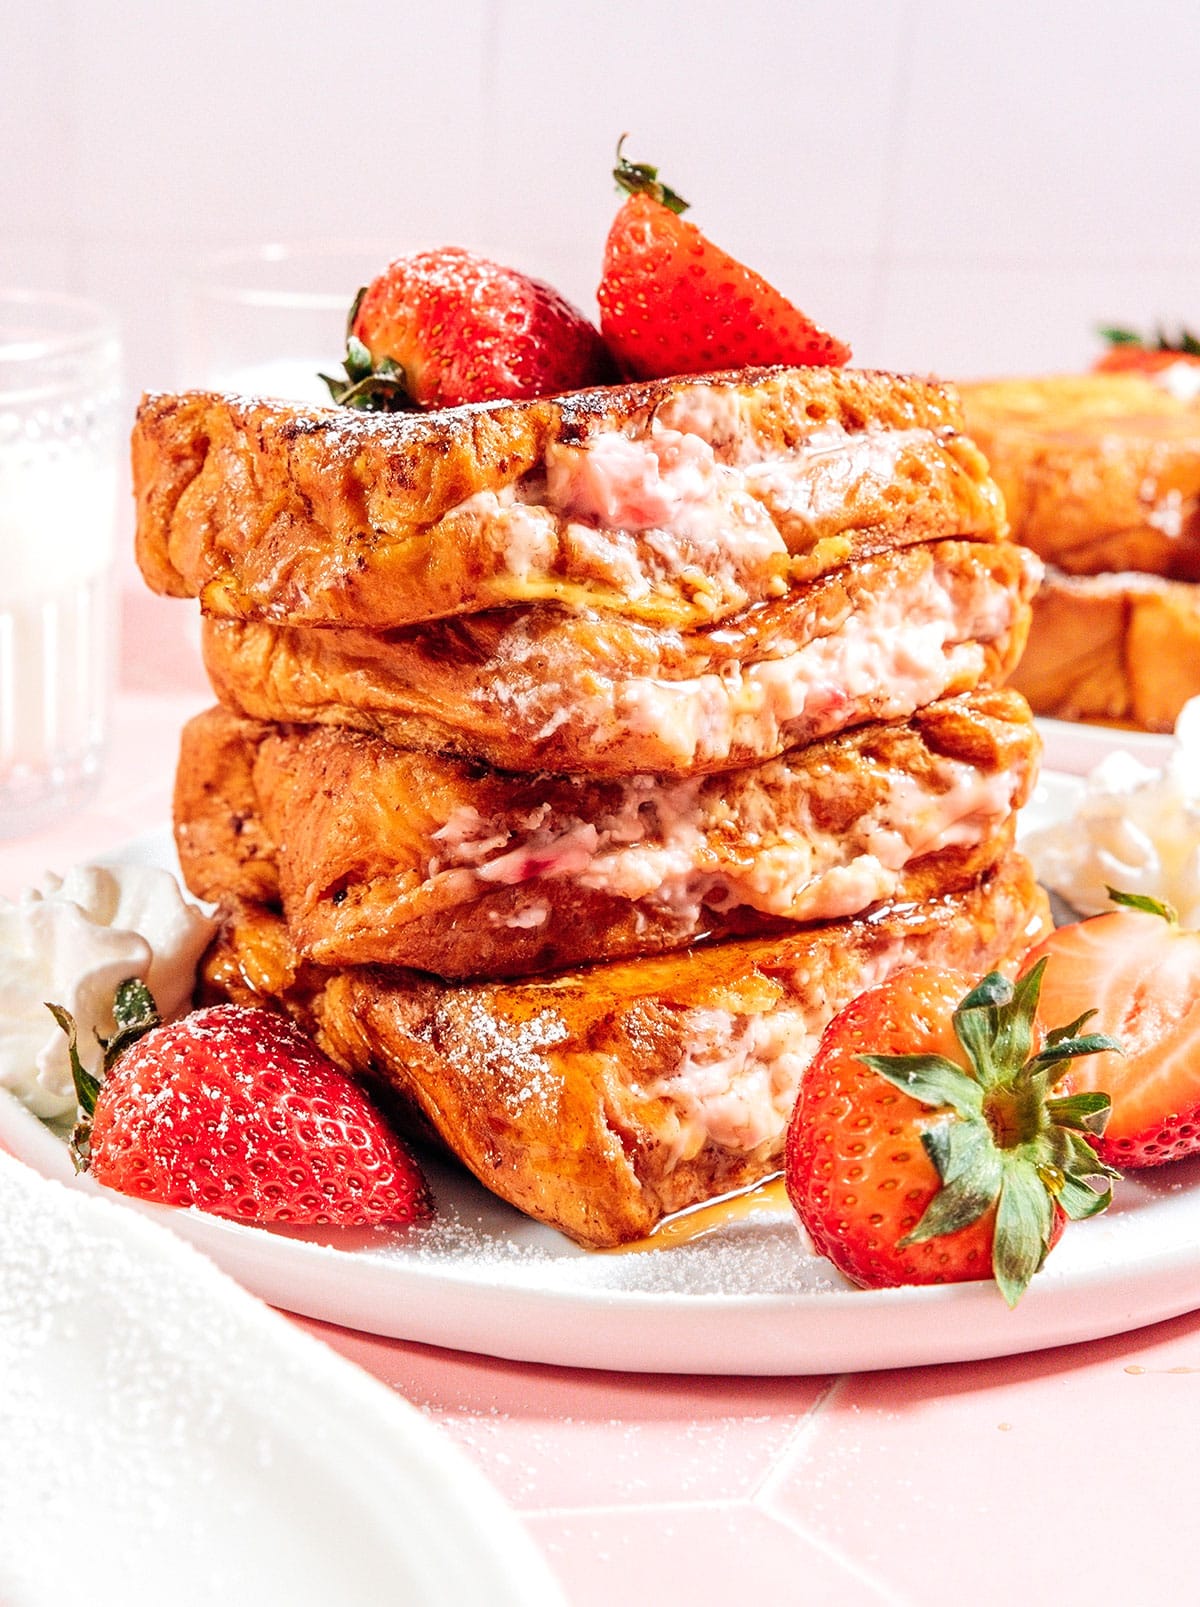 Stuffed french toast with strawberries.